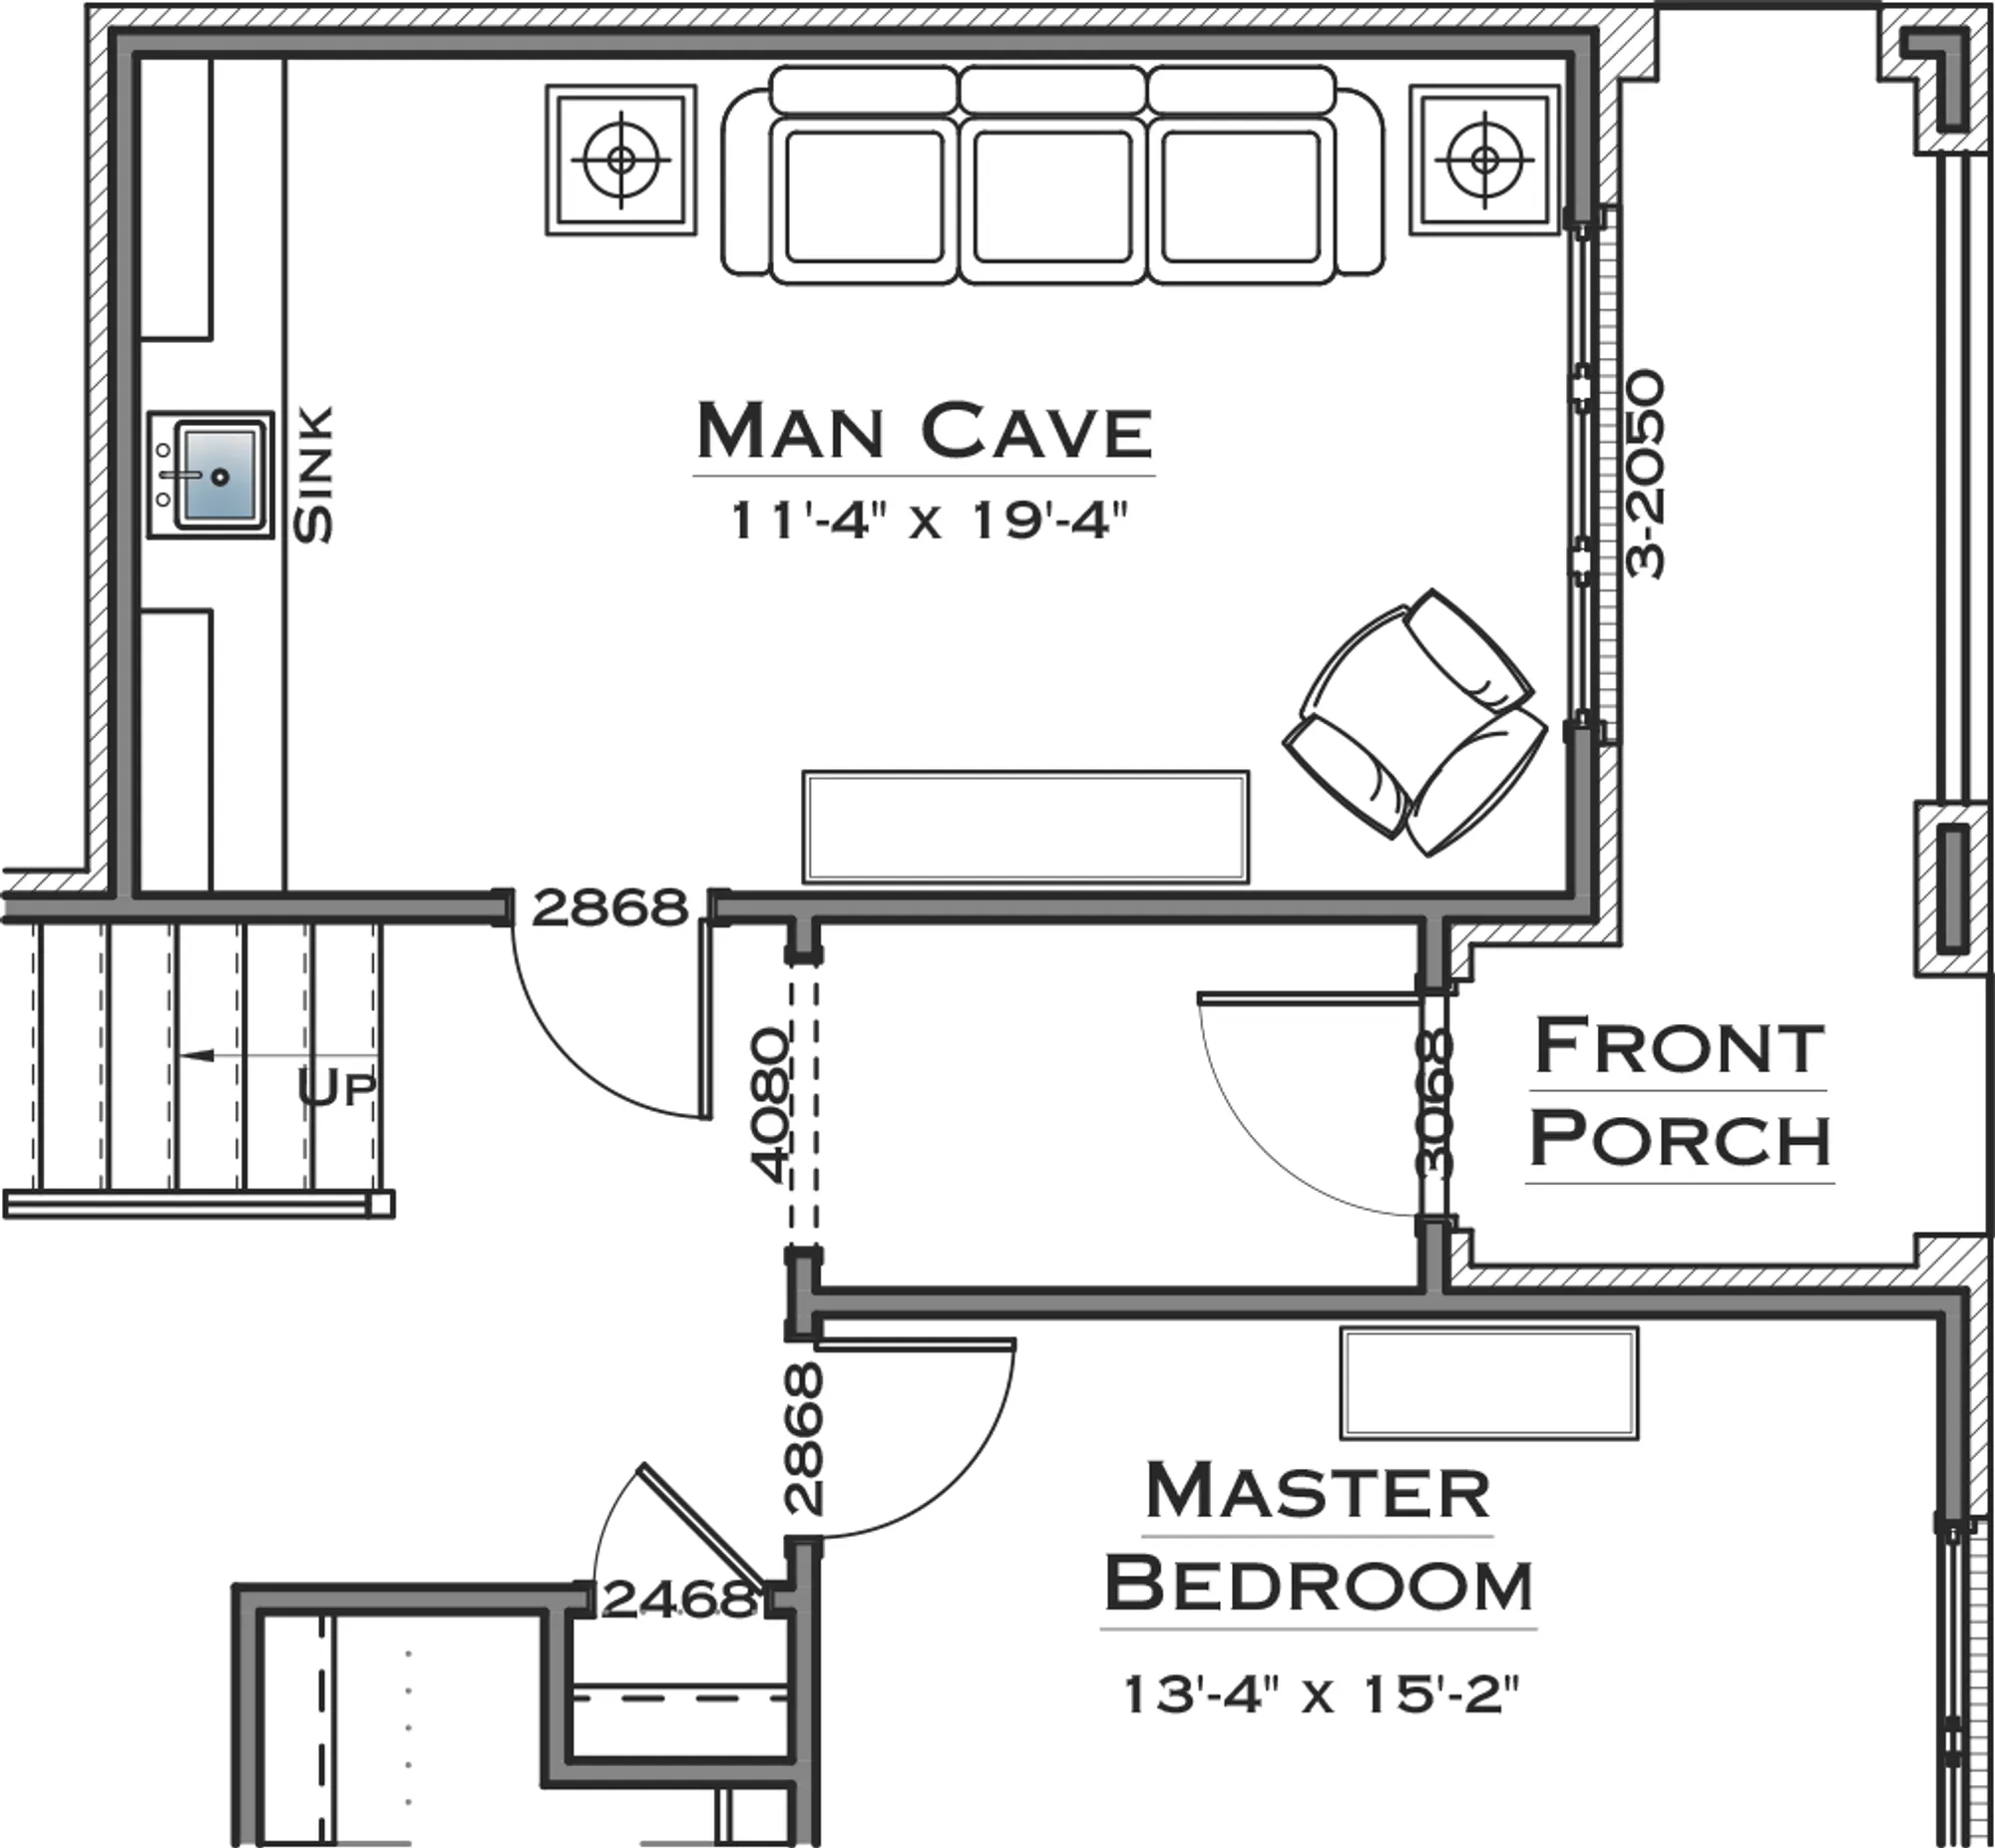 3rd Car Man Cave Option - undefined